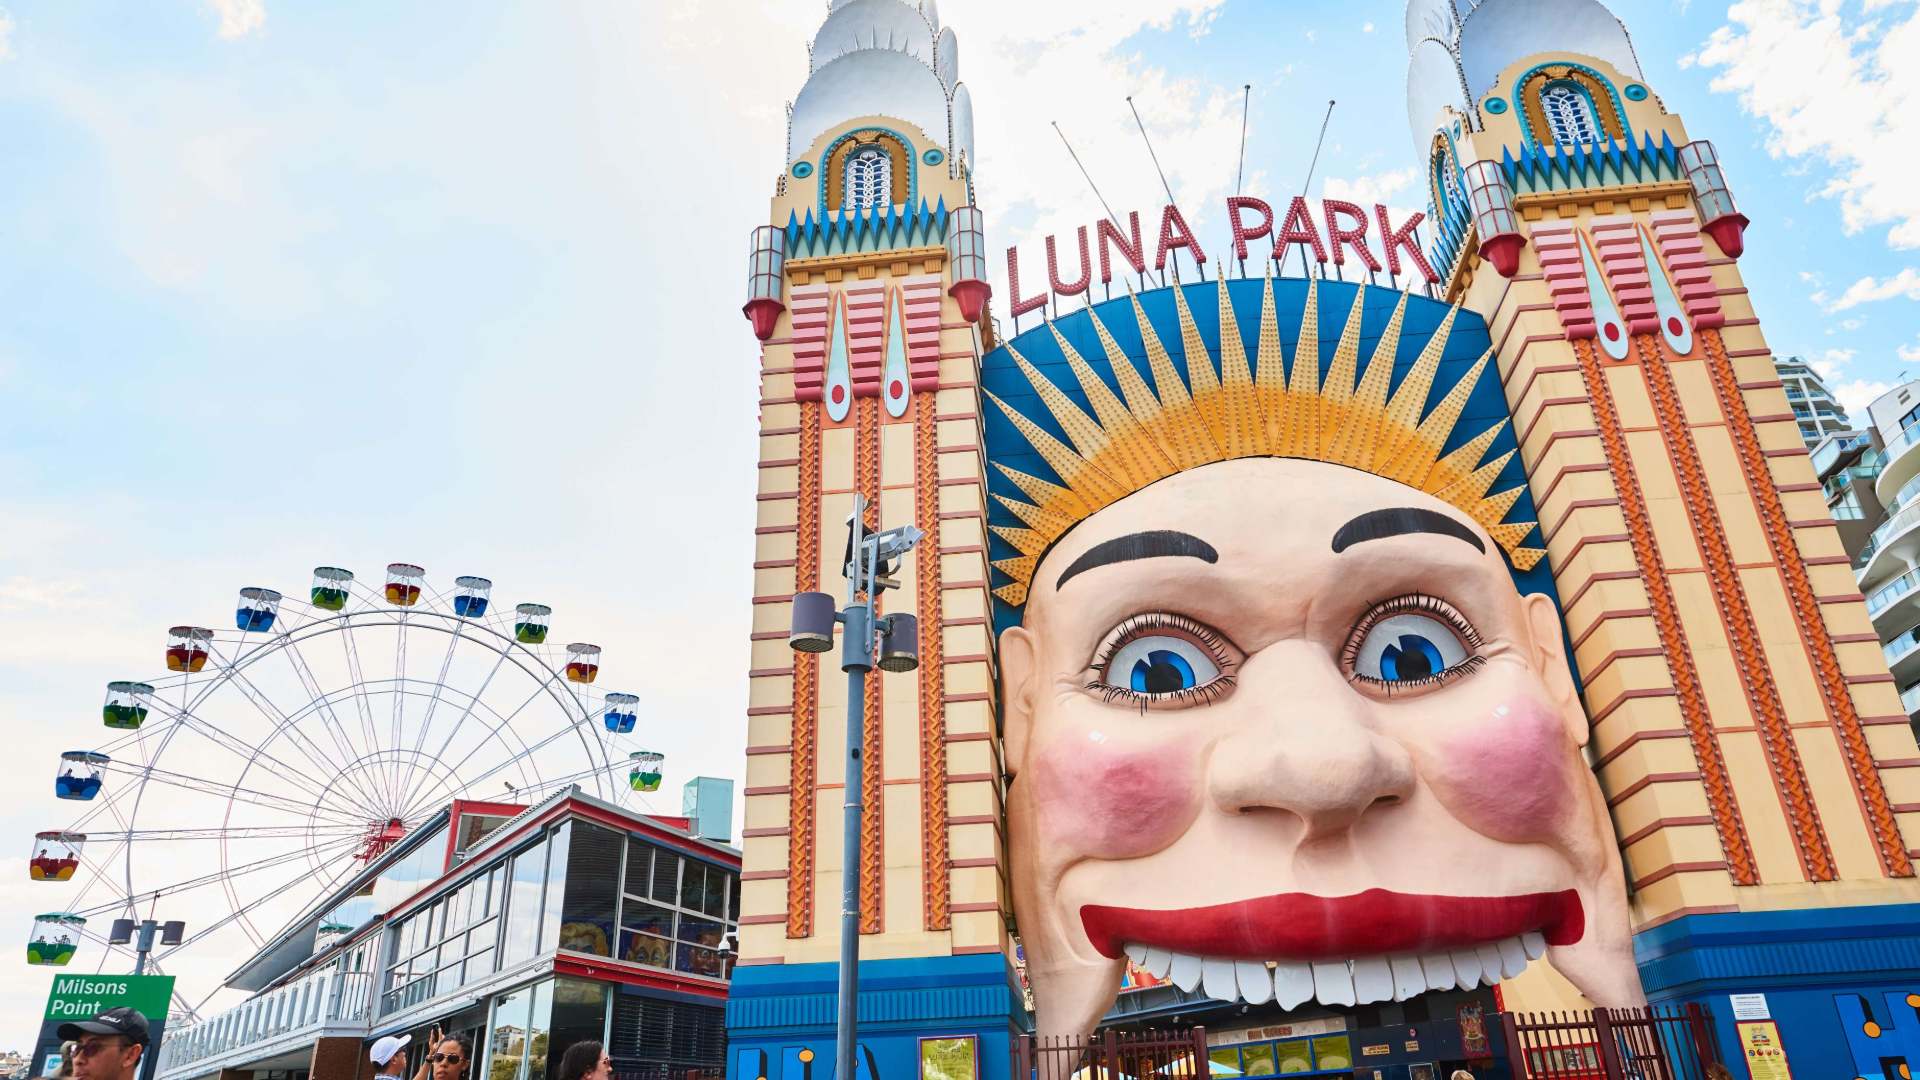 Luna Park Is Undergoing a $30 Million Makeover That'll Add Nine New Permanent Rides